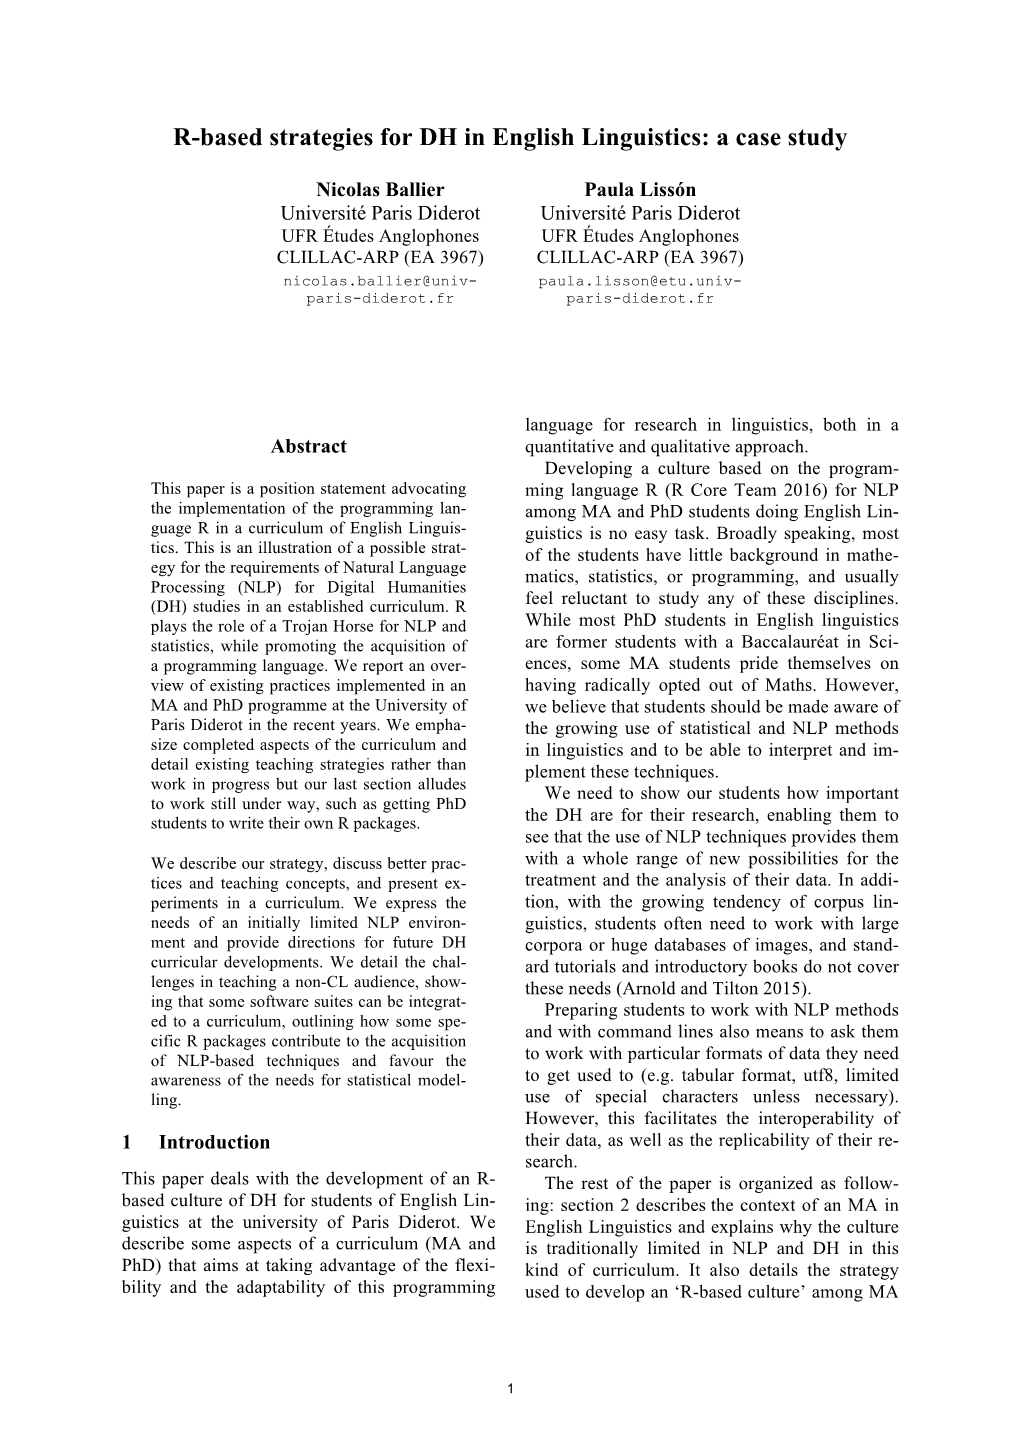 R-Based Strategies for DH in English Linguistics: a Case Study